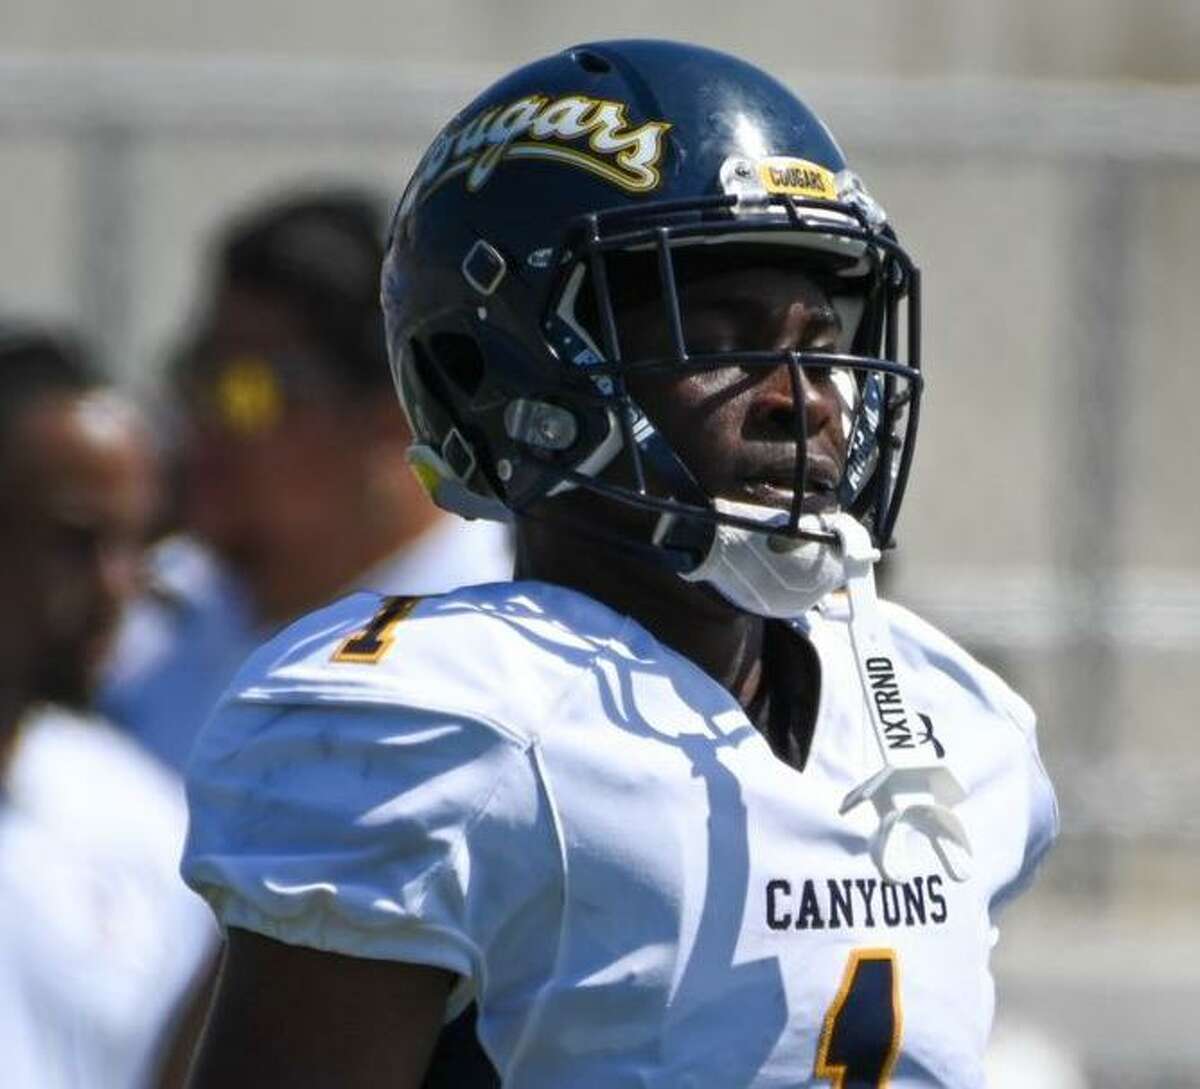 Cornerback Abdul-Lateef Audu is transferring to UH after registering 11 pass breakups and an interception last season for College of the Canyons in Santa Clarita, Calif.